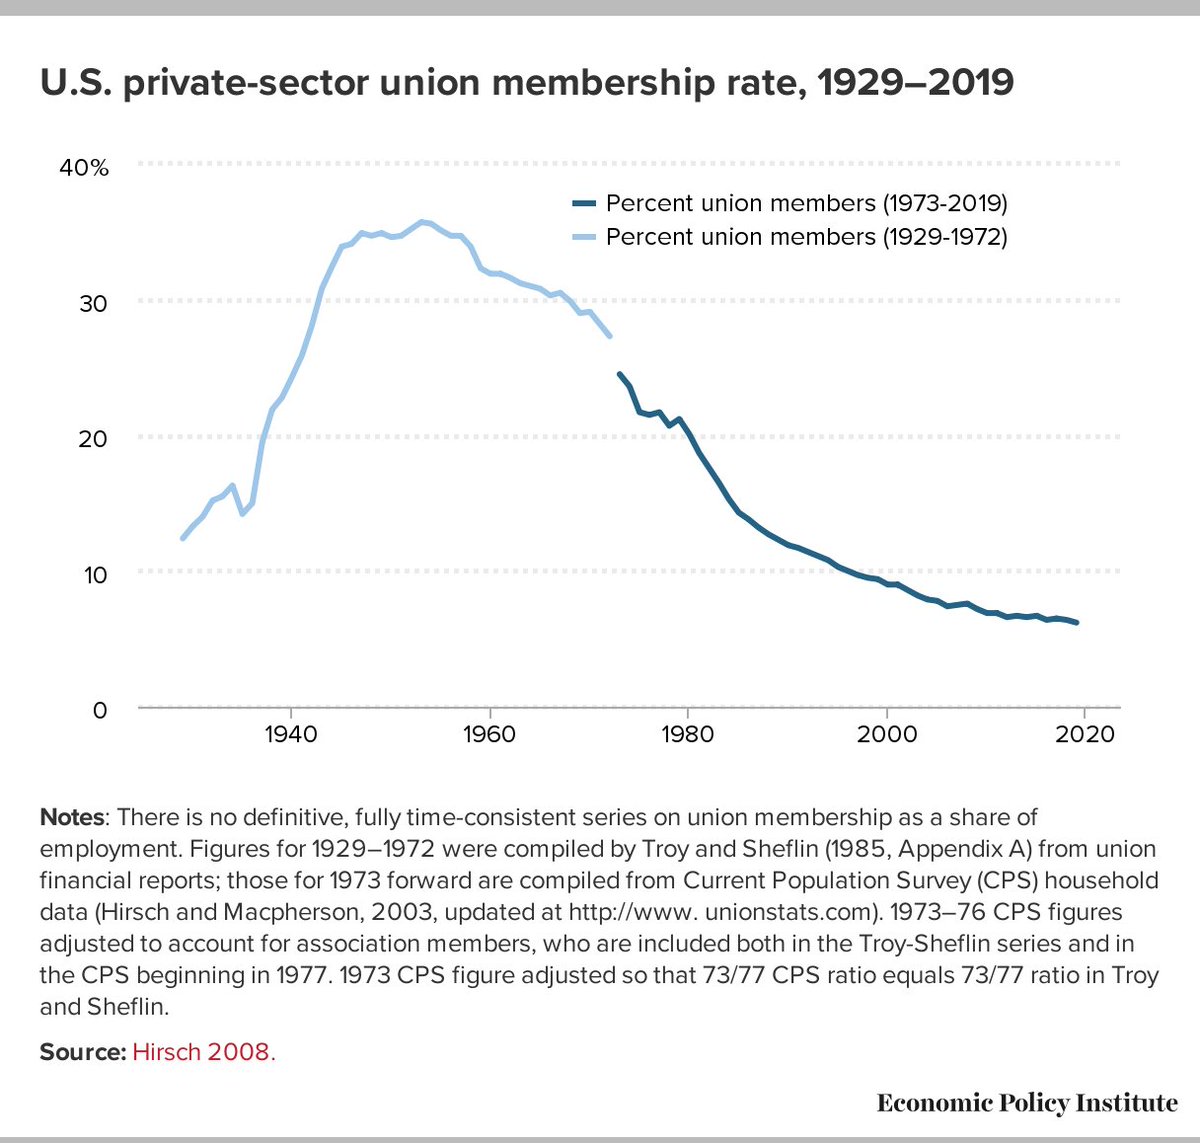 (4/14)Here's some of the newly developed data analysis. First, the historical series of pvt sector union density decline. Key is noting steep decline in 1970s and 1980s.